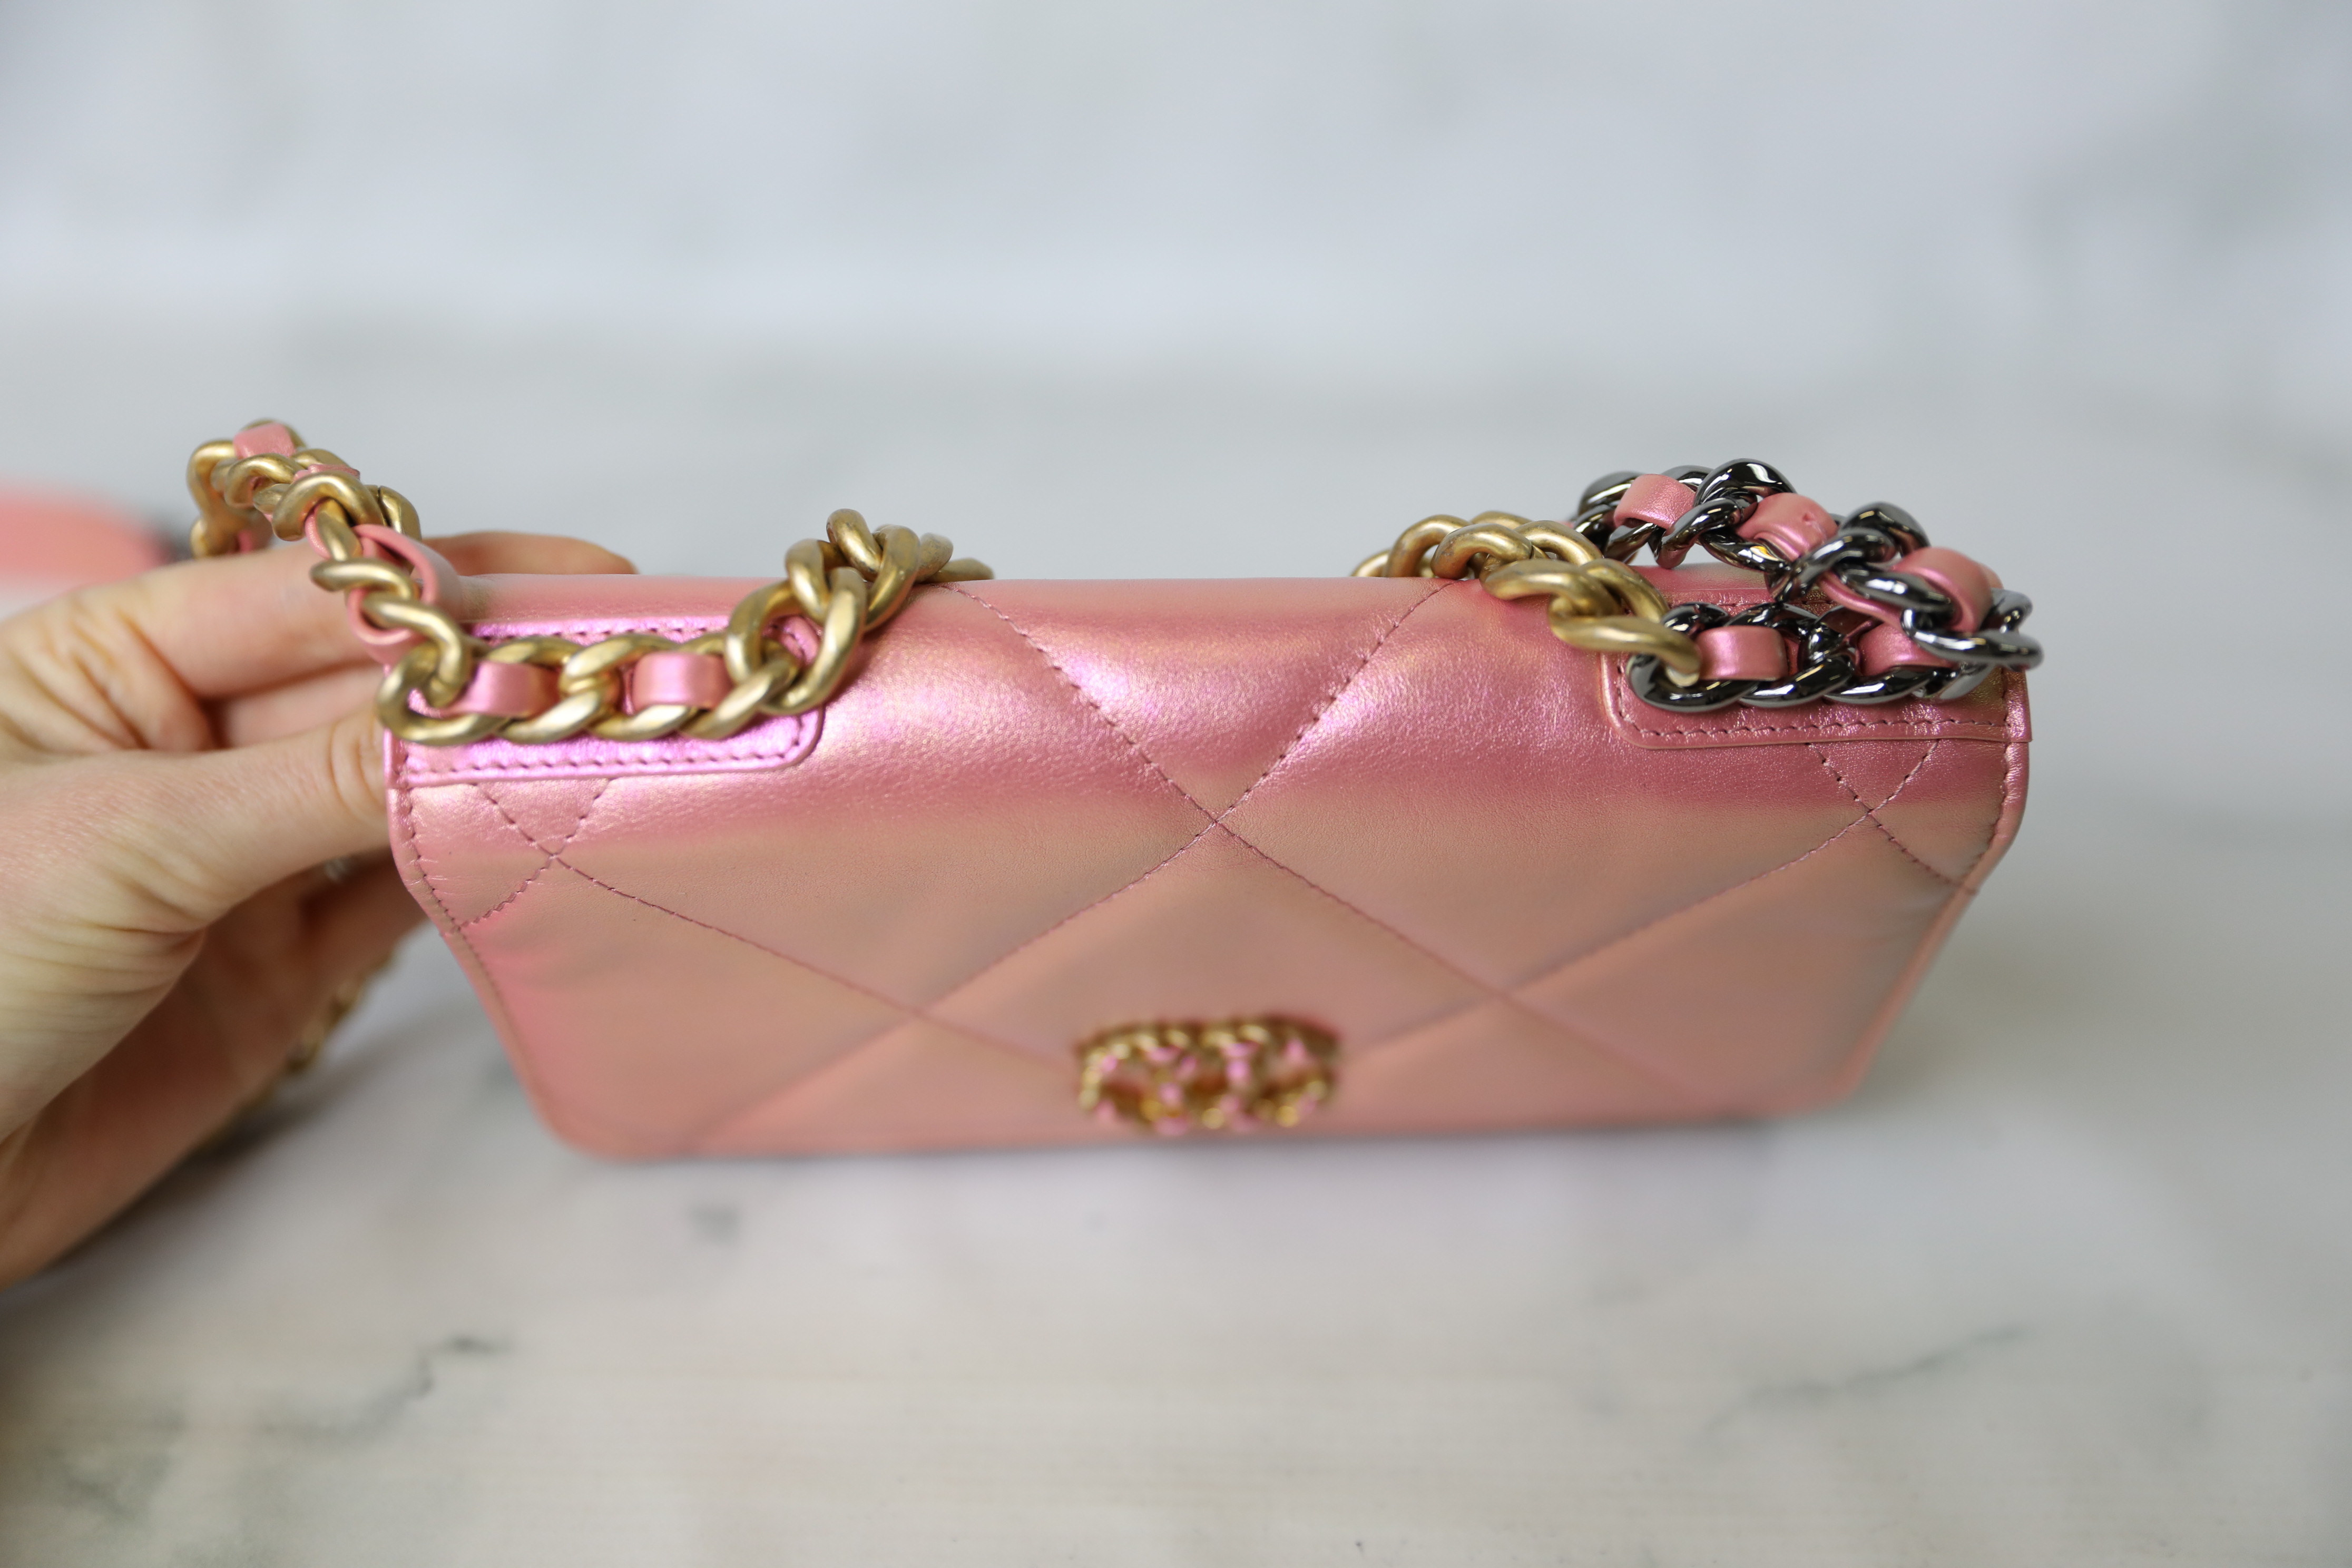 Chanel 19 Wallet on Chain, Pink Iridescent, Preowned in Box WA001